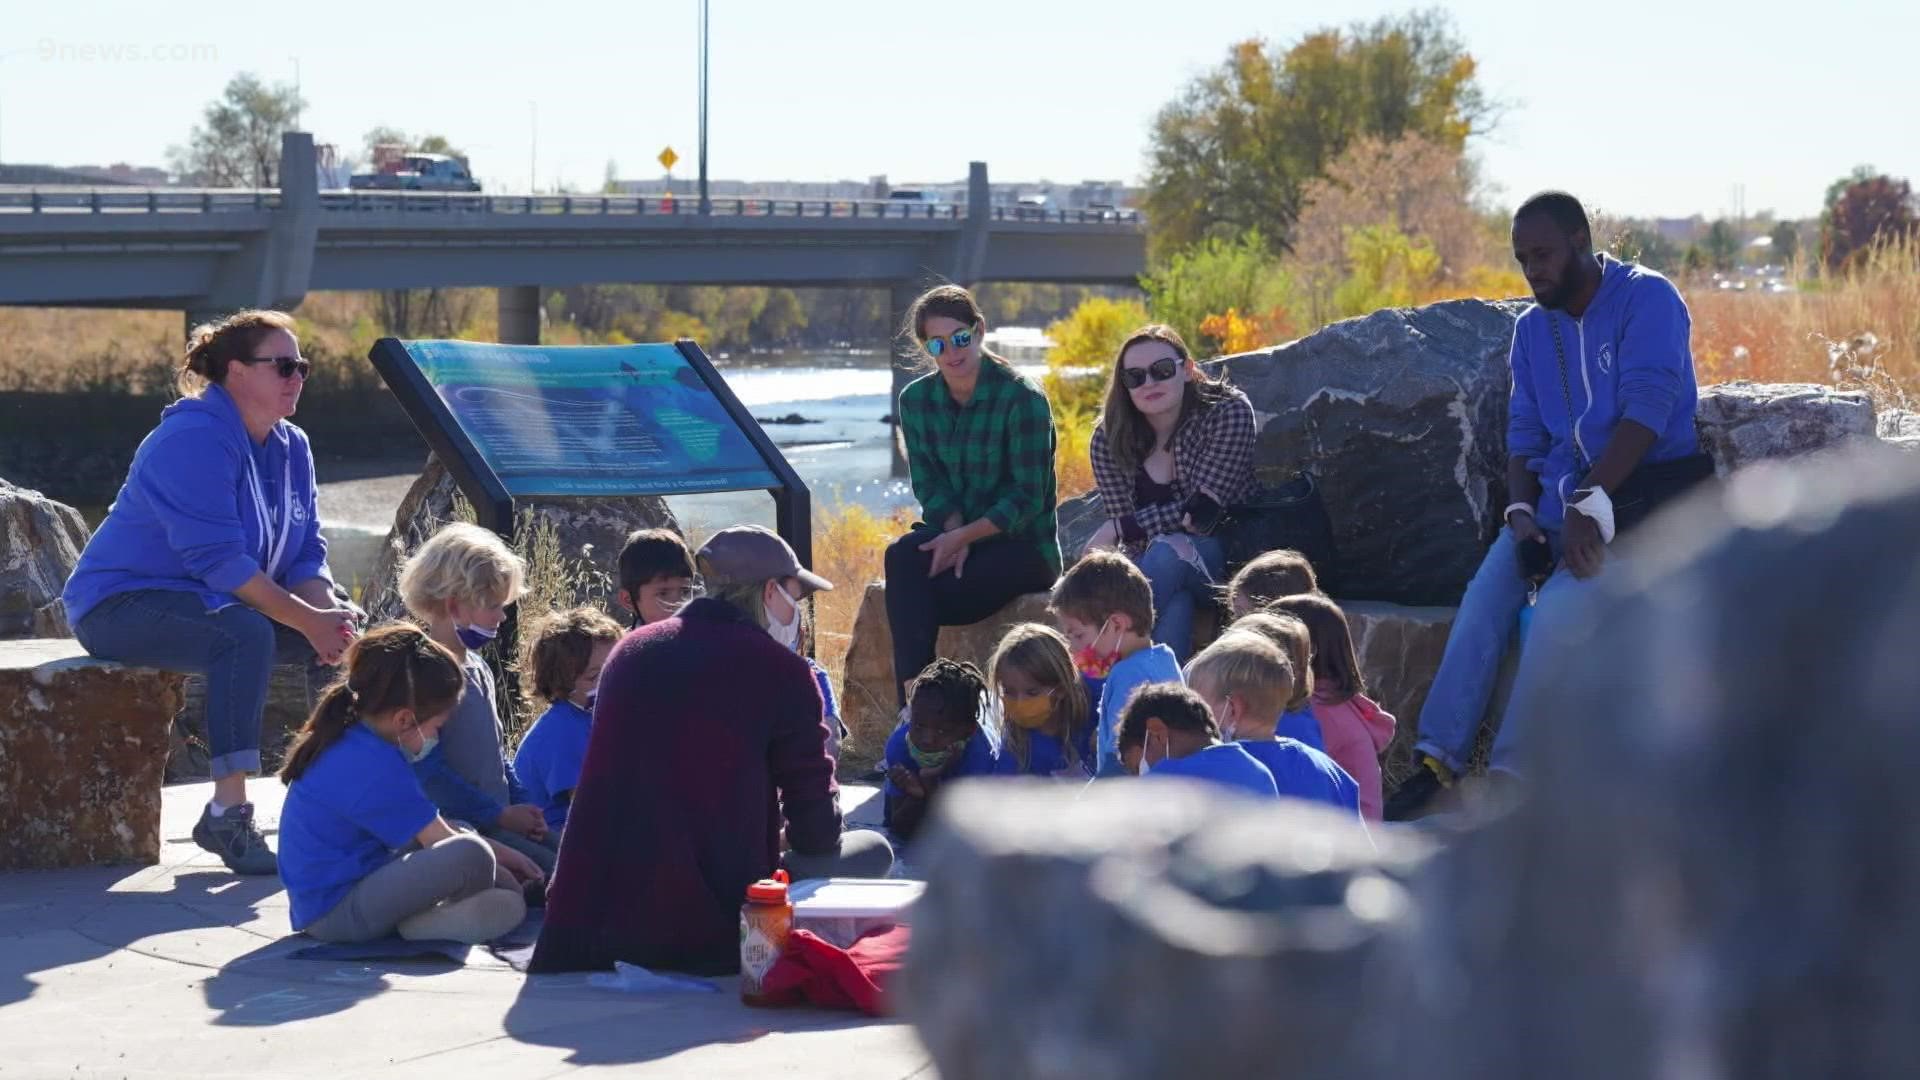 A team is working to bring the South Platte River back to it's original glory with the help of some of Colorado's youngest residents.